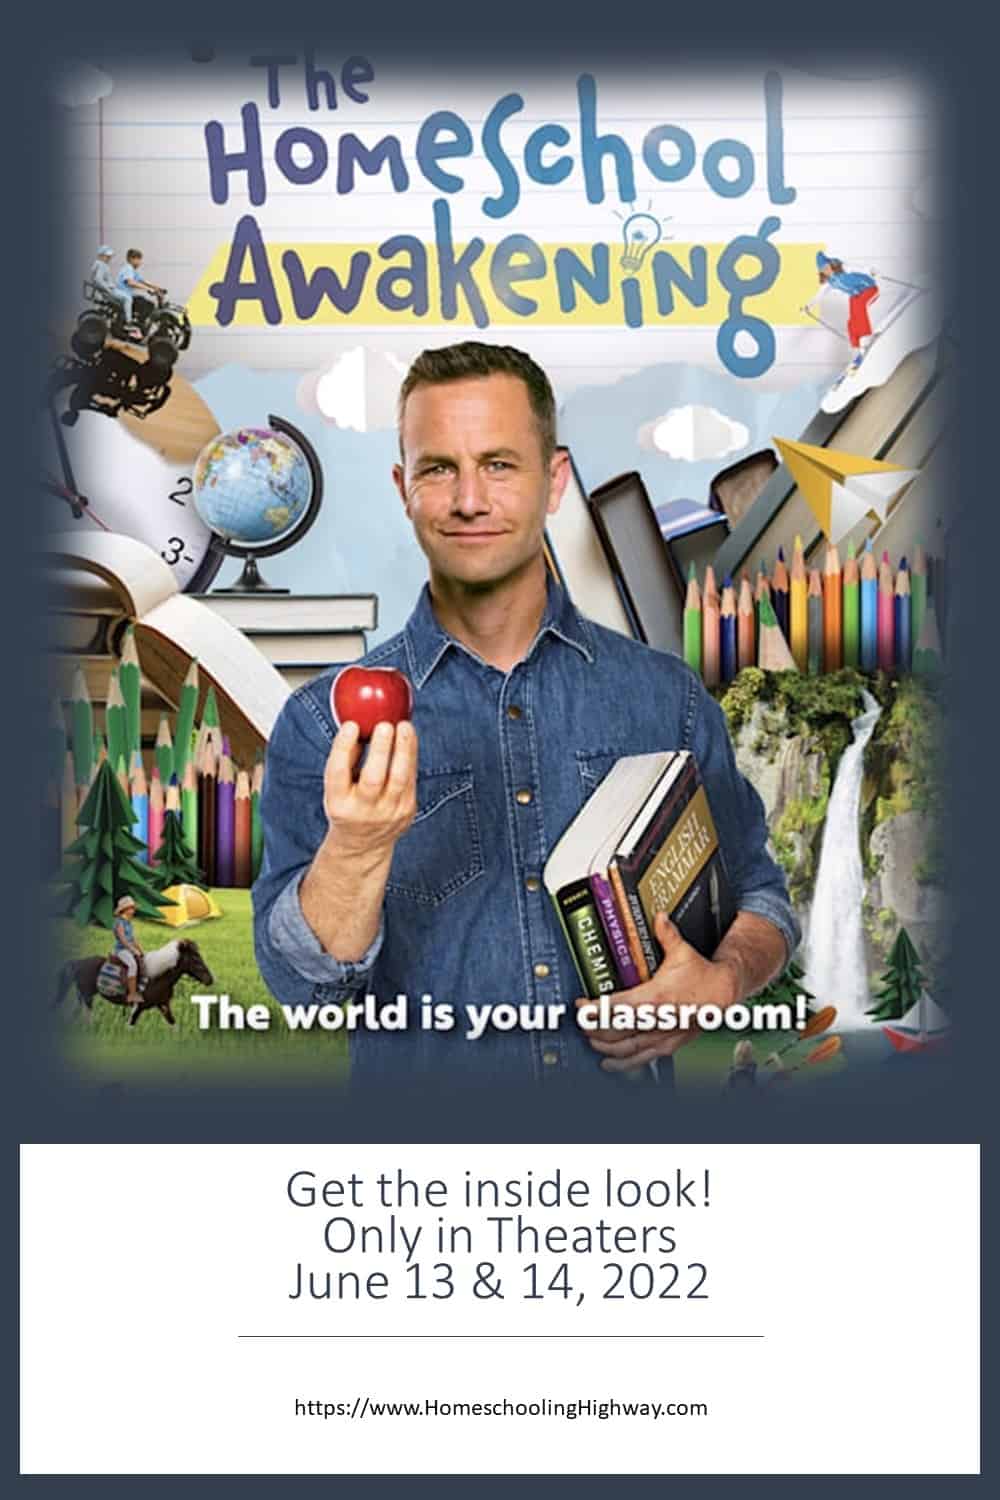 Movie cover image of Kirk Cameran holding an apple.The Homeschool Awakening Movie Review by Homeschooling Highway